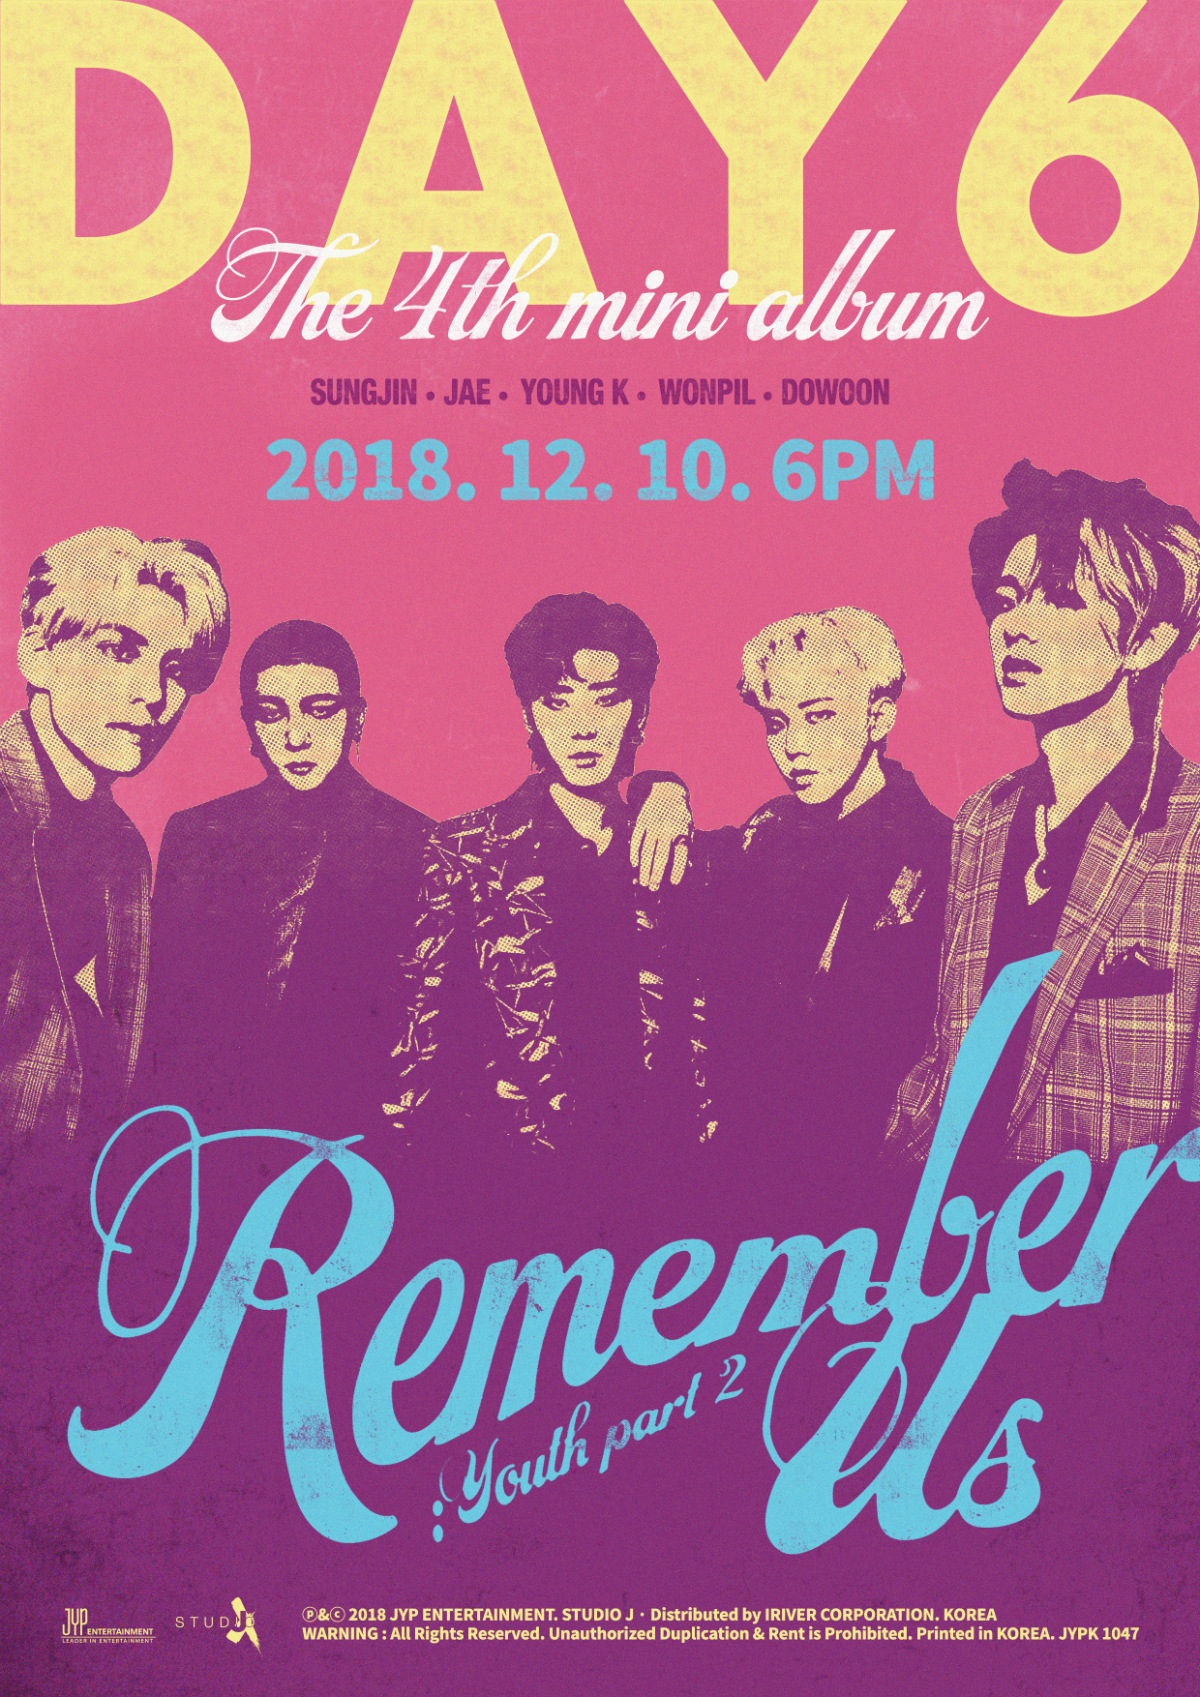 DAY6_Remember Us Youth Part 2 Art Poster.jpg